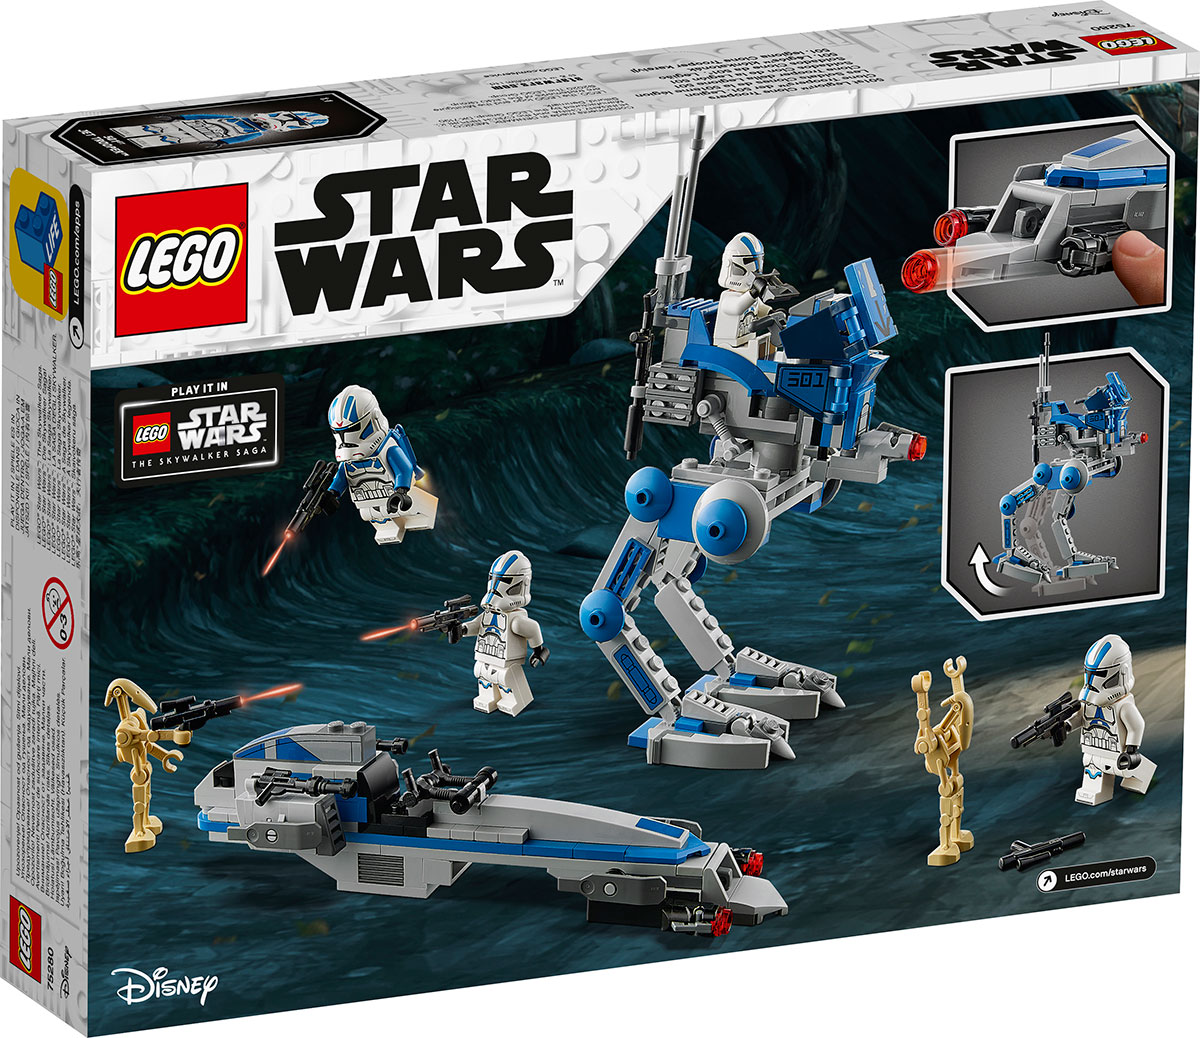 LEGO Star Wars 2020 Update & Official Images! | The Brick Post!